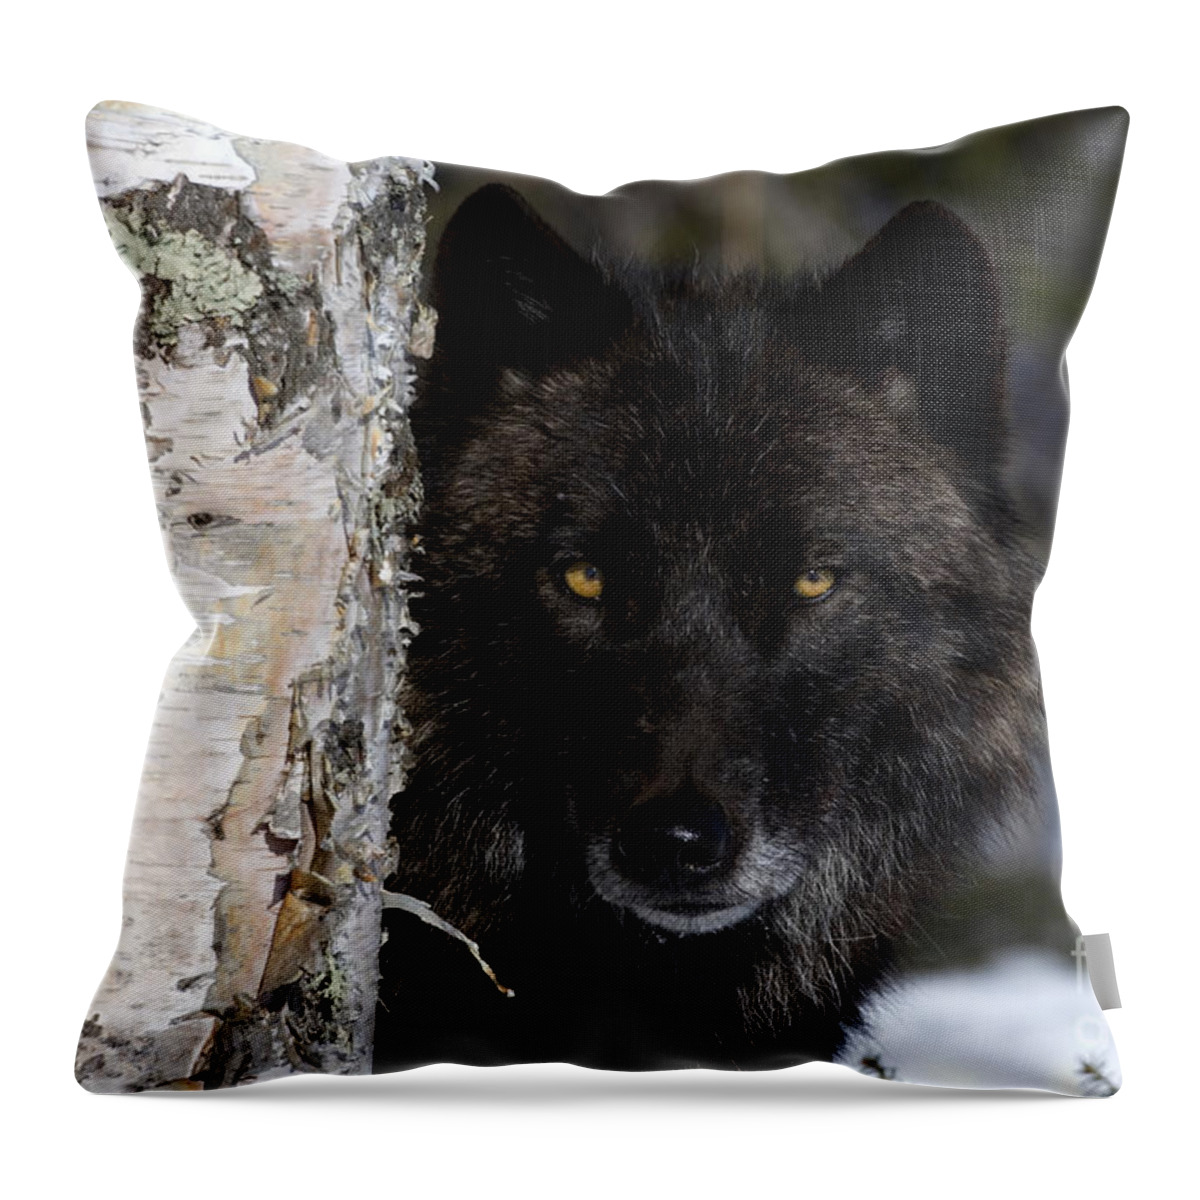 Gray Wolf Throw Pillow featuring the photograph Gray Wolf by Jean-Louis Klein and Marie-Luce Hubert